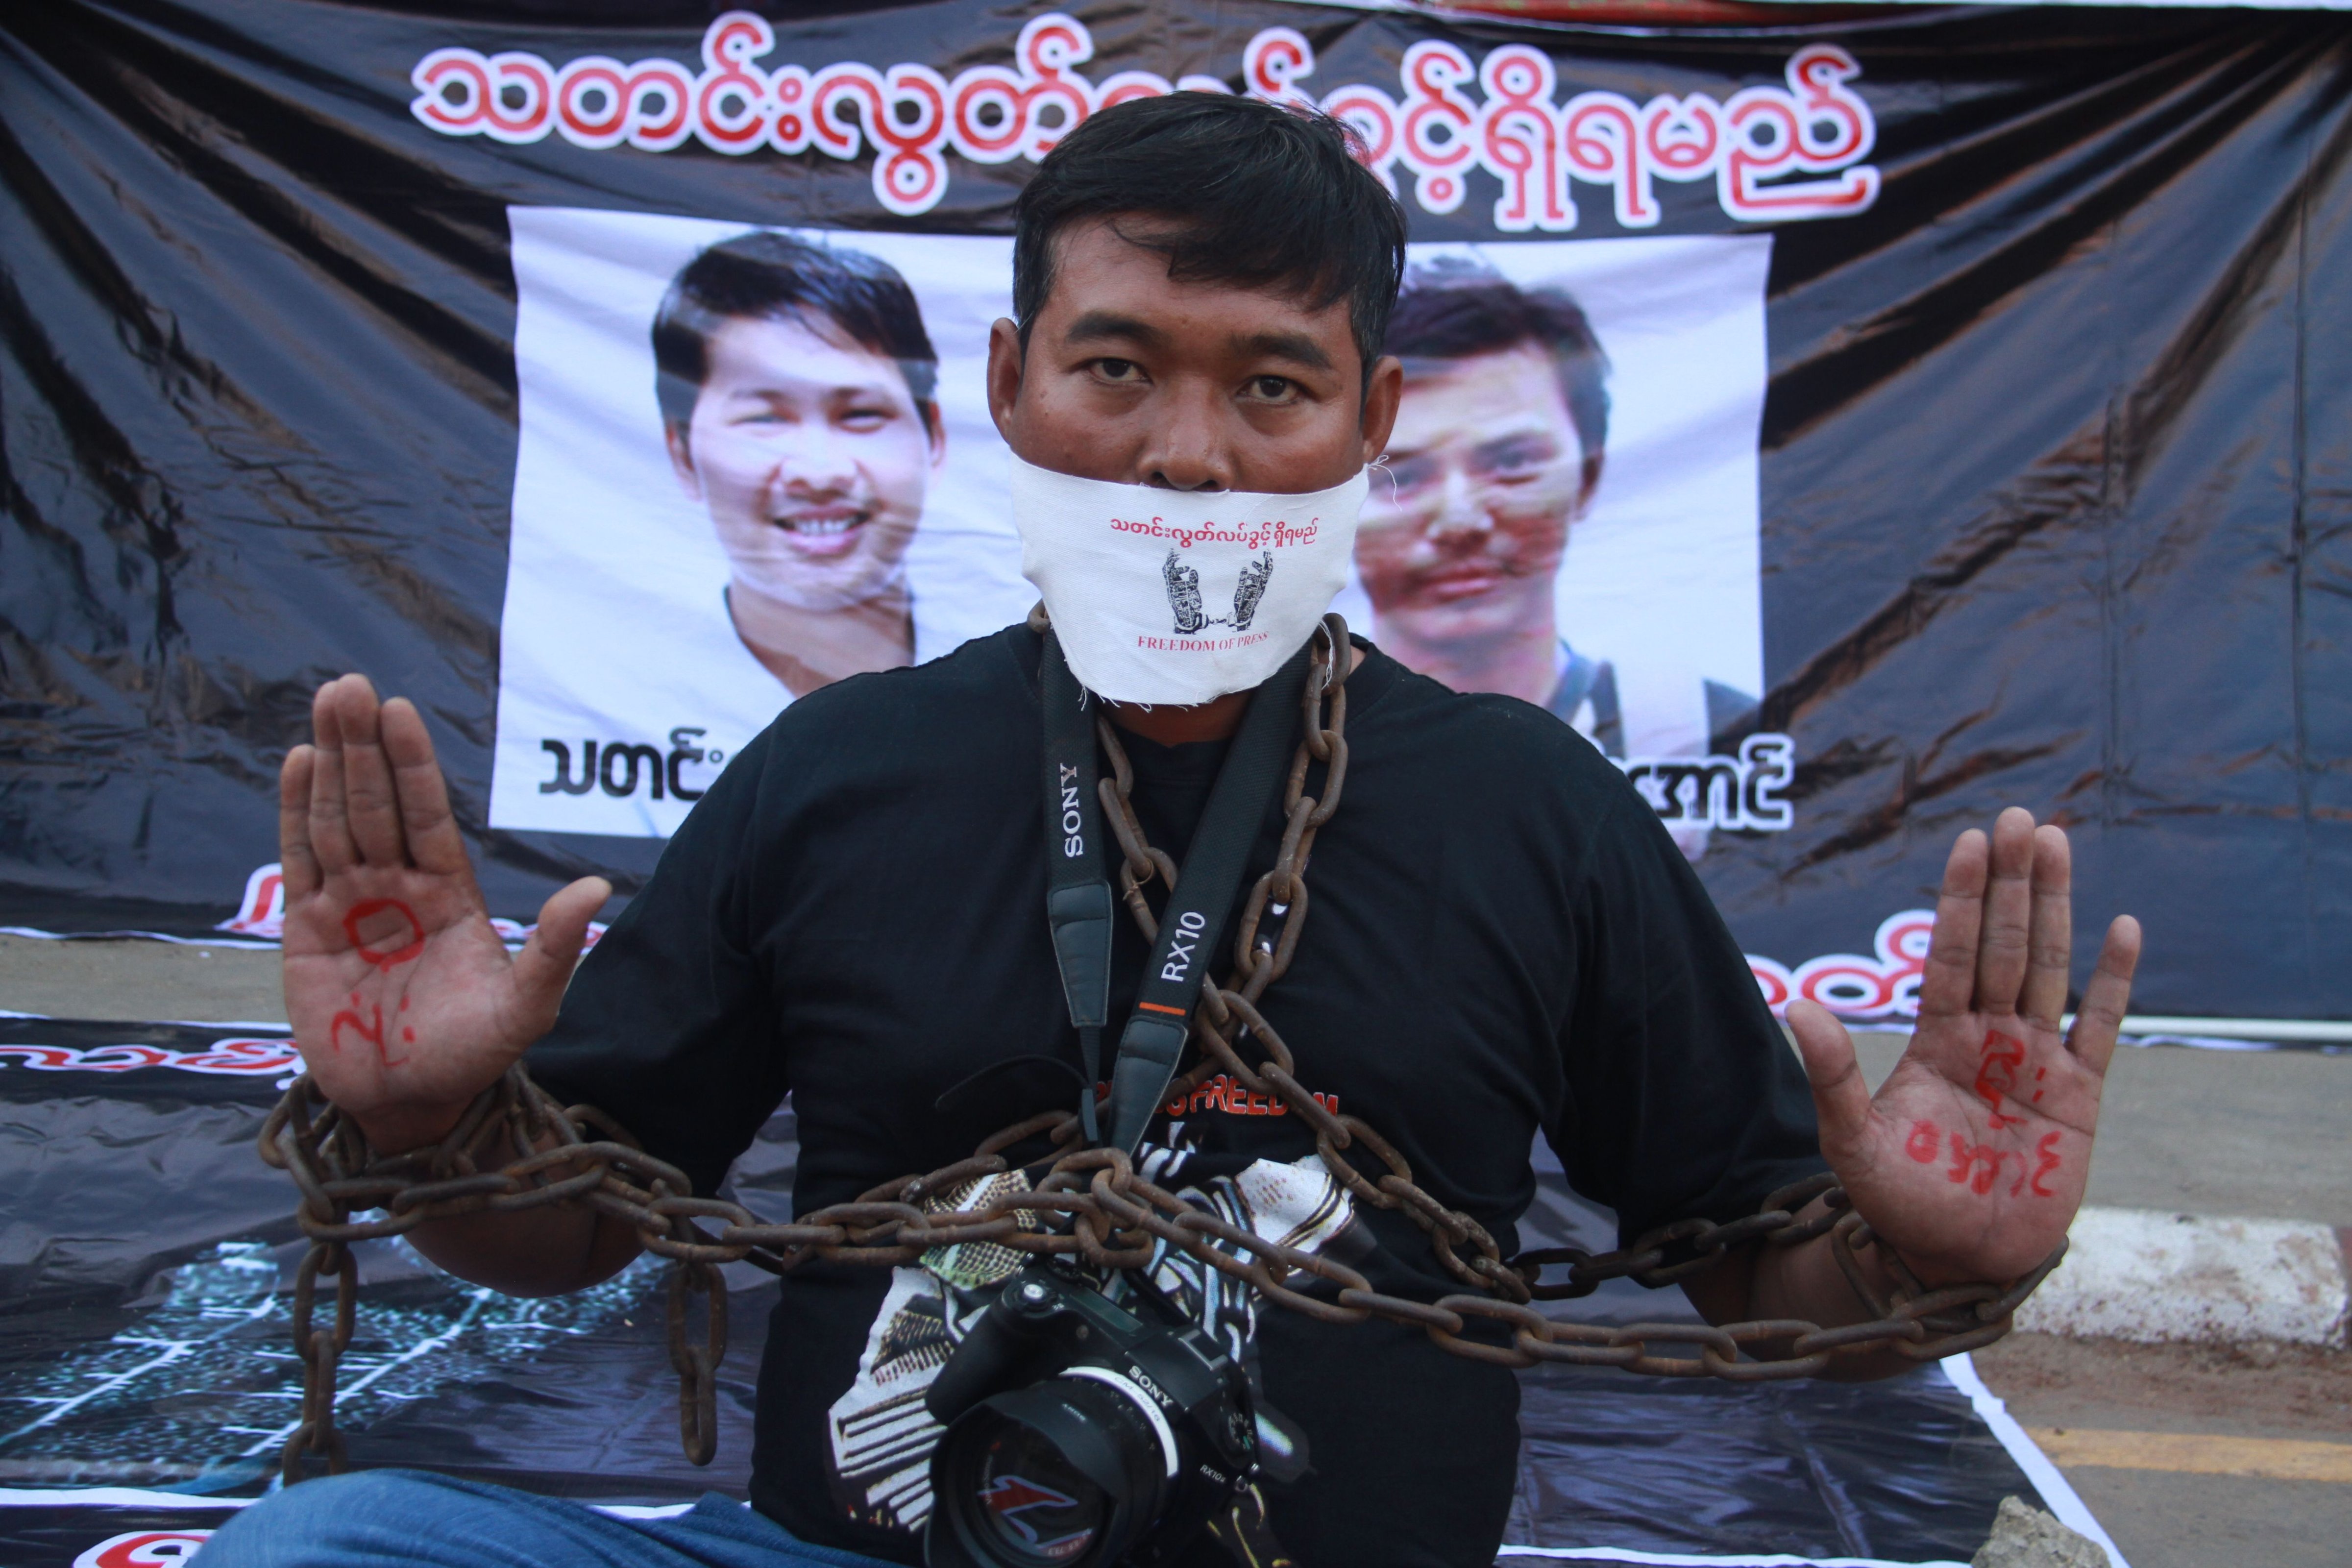 A journalist protests the arrest of Reuters journalists Wa Lone and Kyaw Soe Oo (pictured in posters behind) in Pyay, Myanmar on Dec. 27, 2017. (Thiha Lwin—AFP/Getty Images)